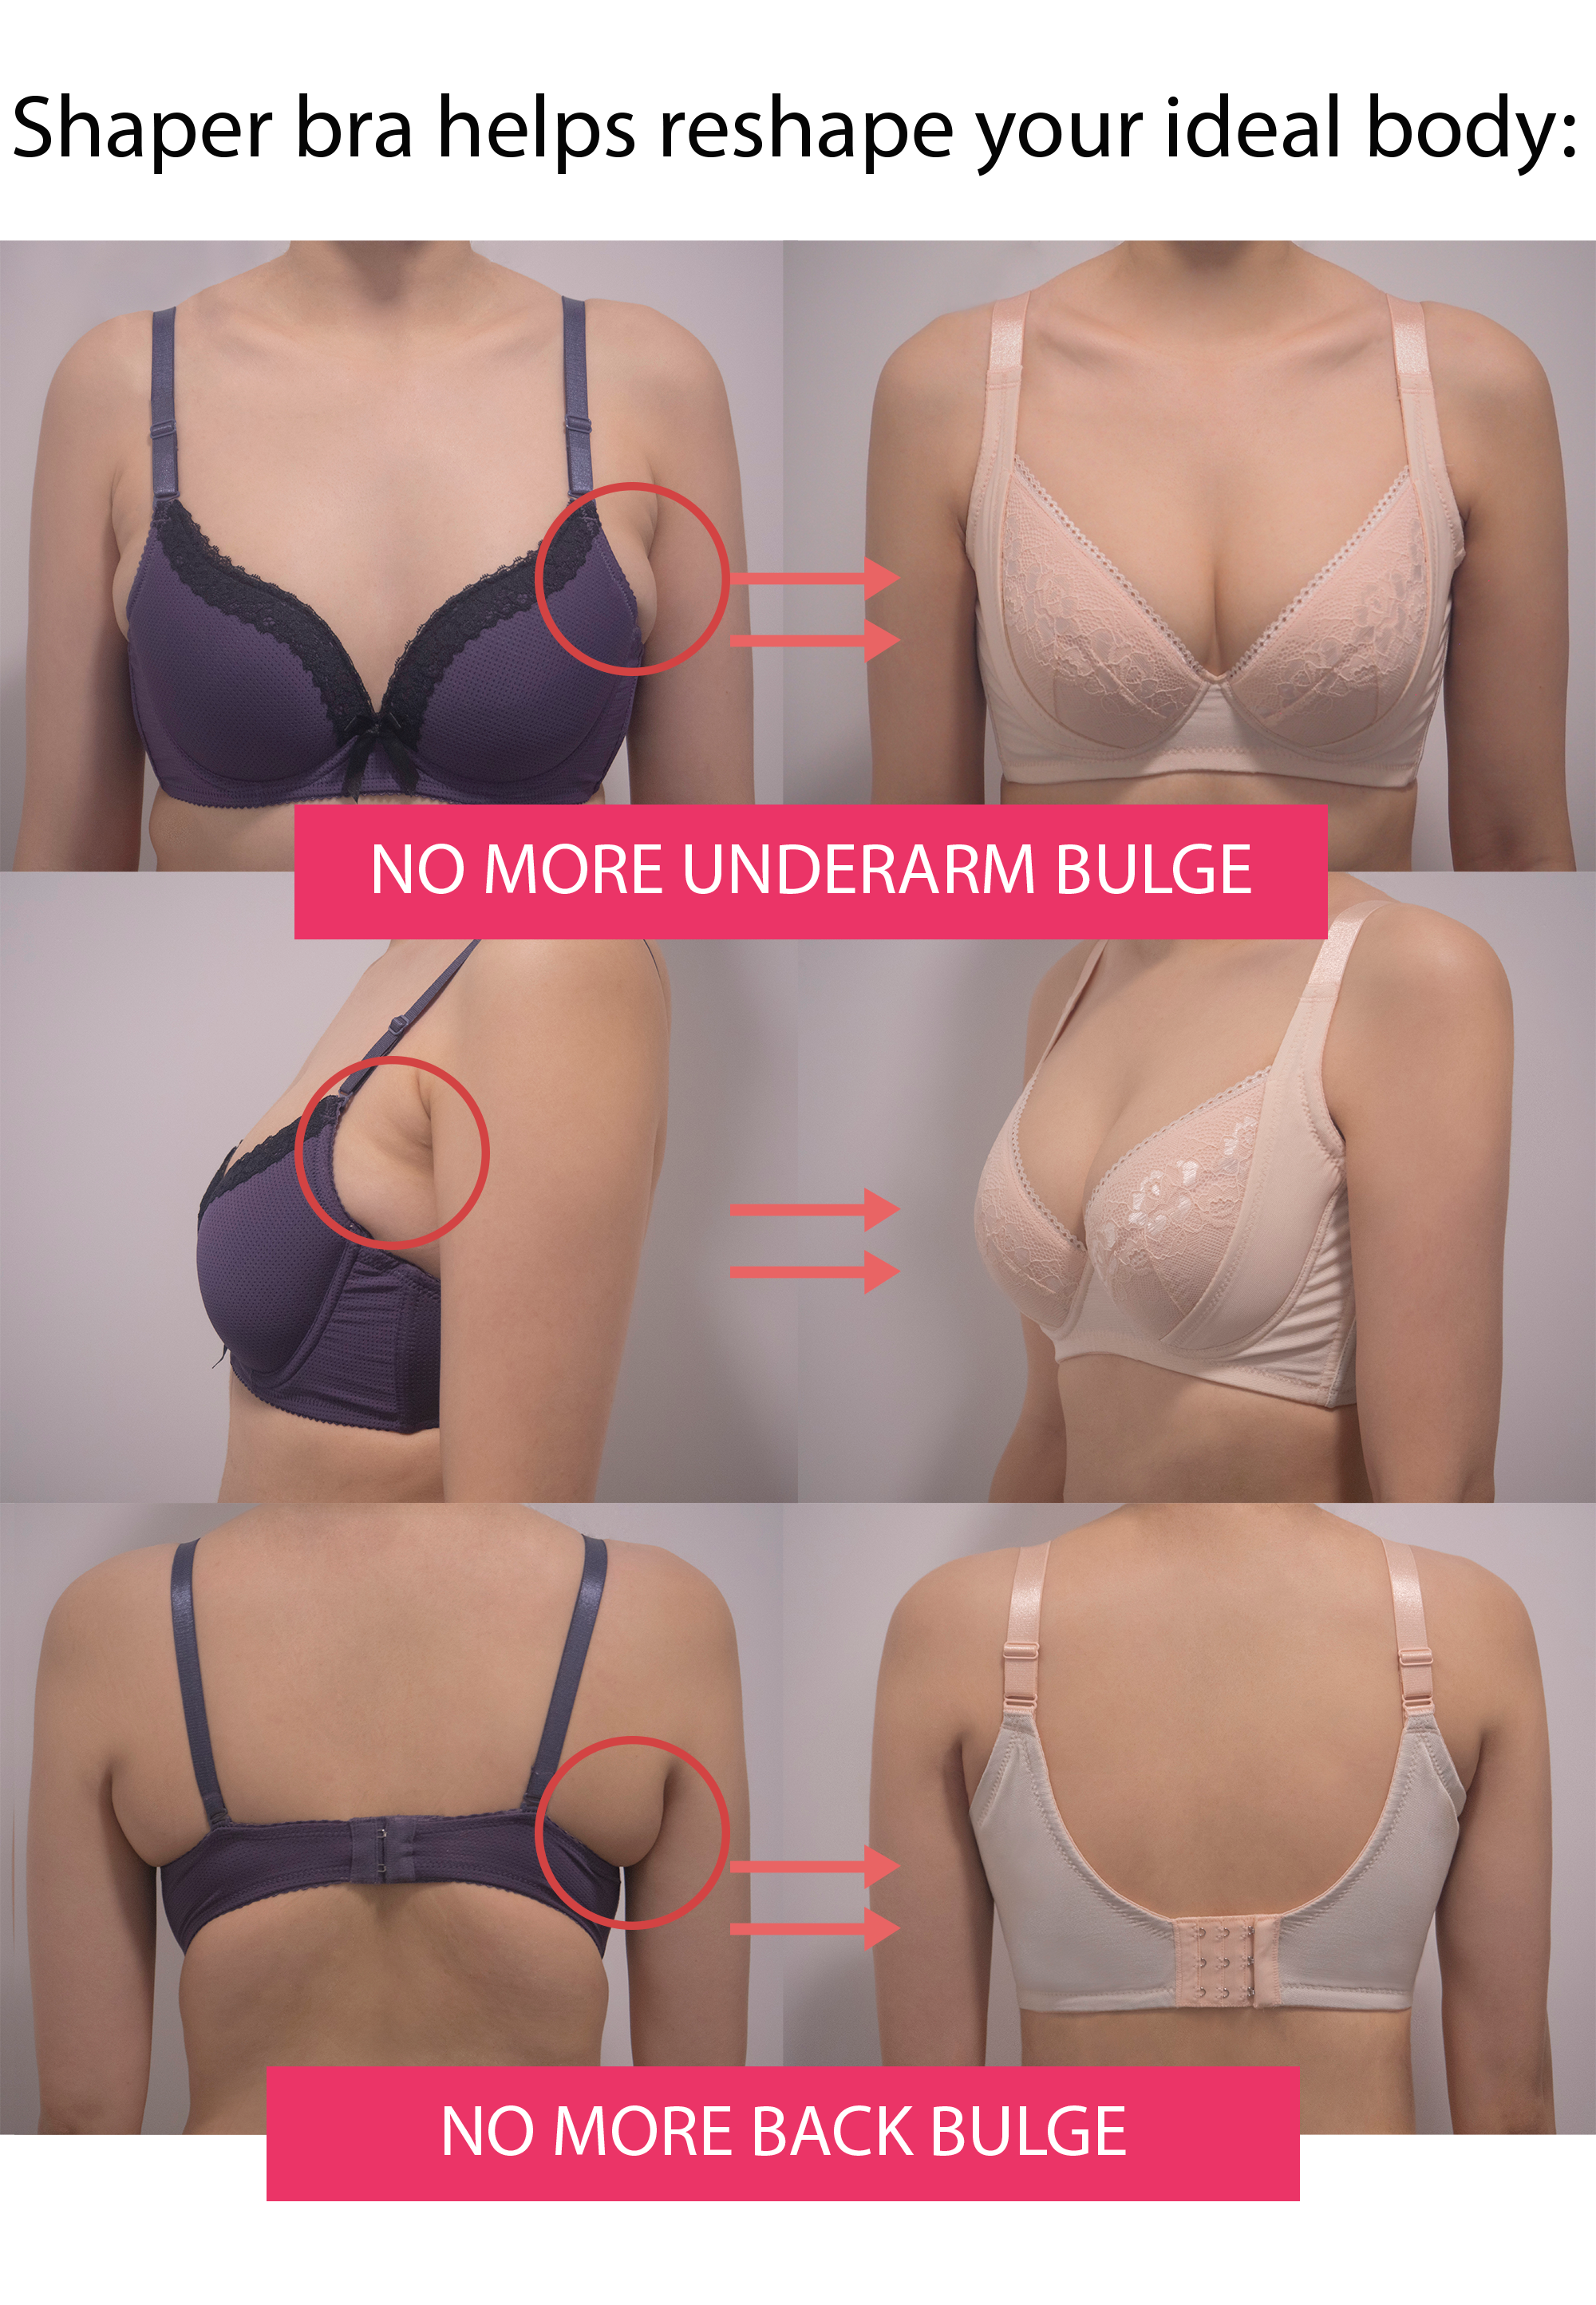 Is 36D an average bra size for a 16-year-old? - Quora